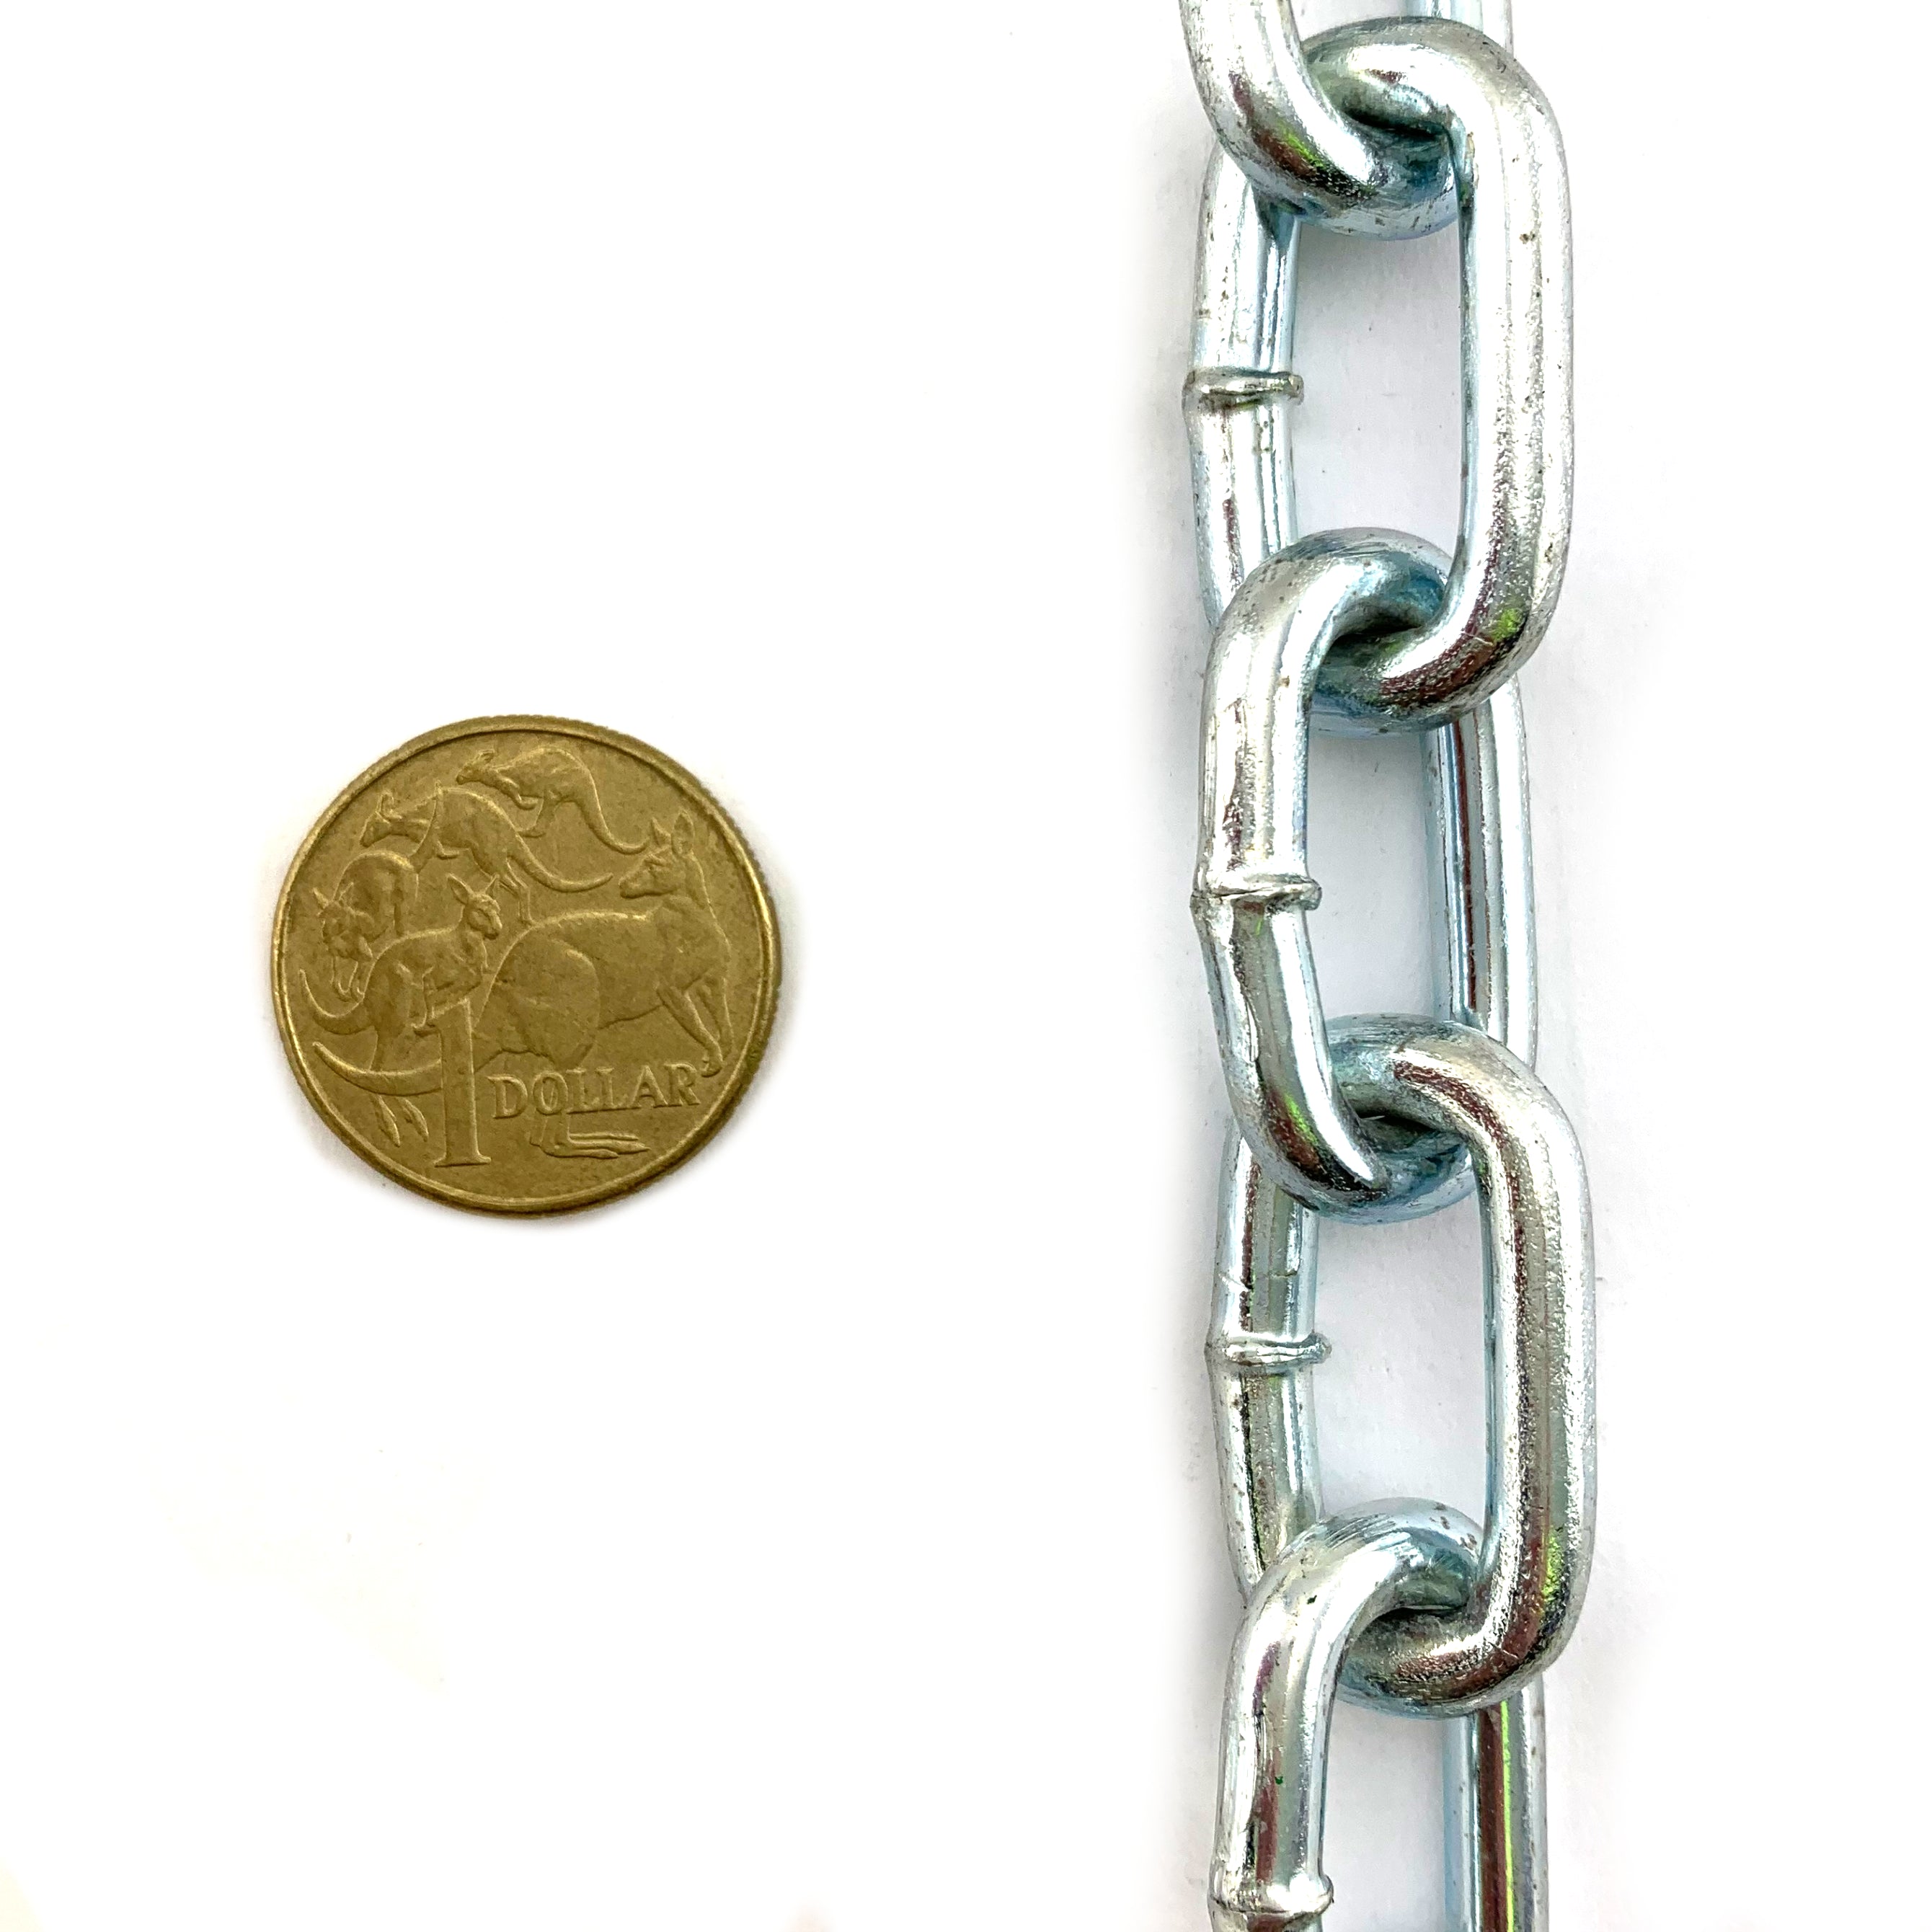 5mm zinc plated welded link chain. Order by the metre or bulk 25kg bucket. Australia wide delivery.